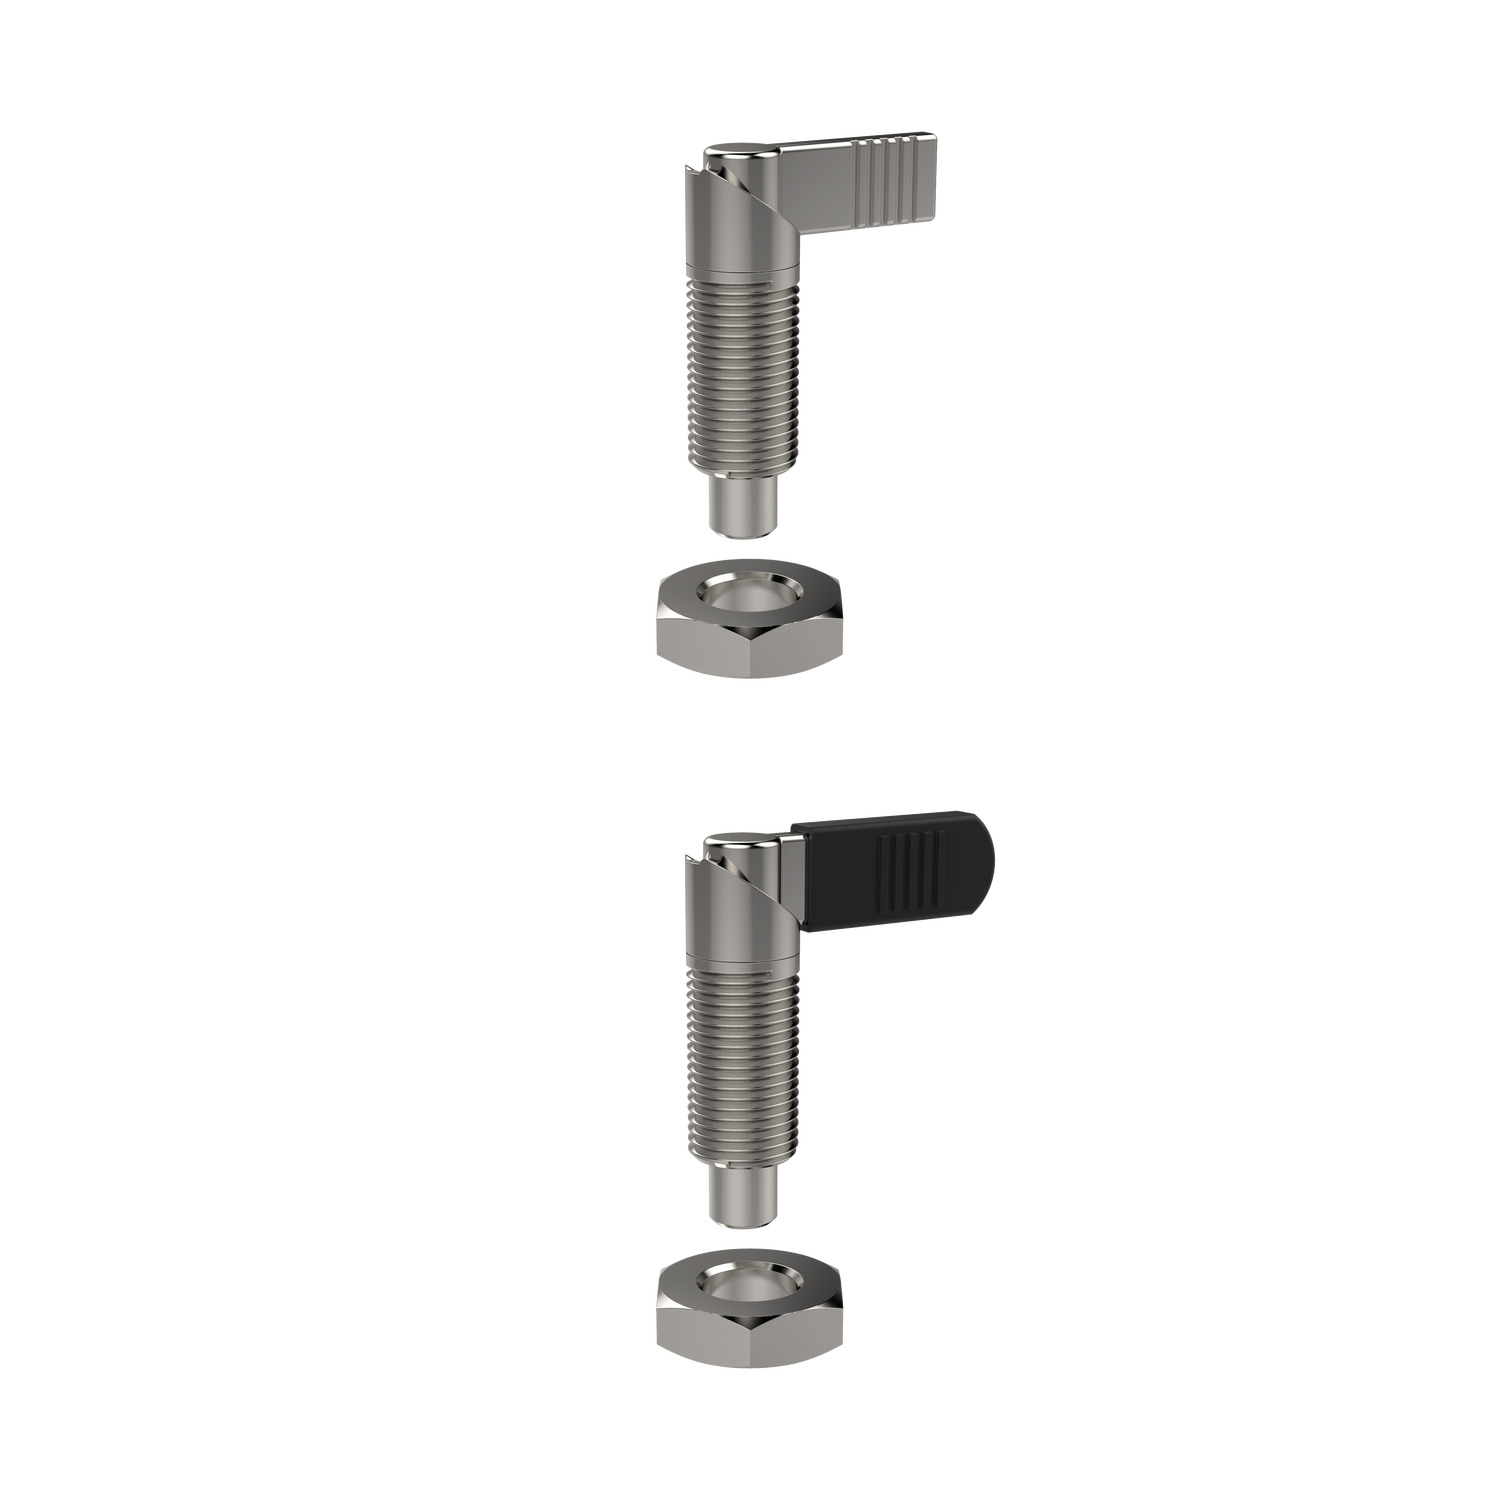 32501.W0310 Index Plungers - Lever Grip - Stainless Without Grip - 5 - M10x1,0 - 10